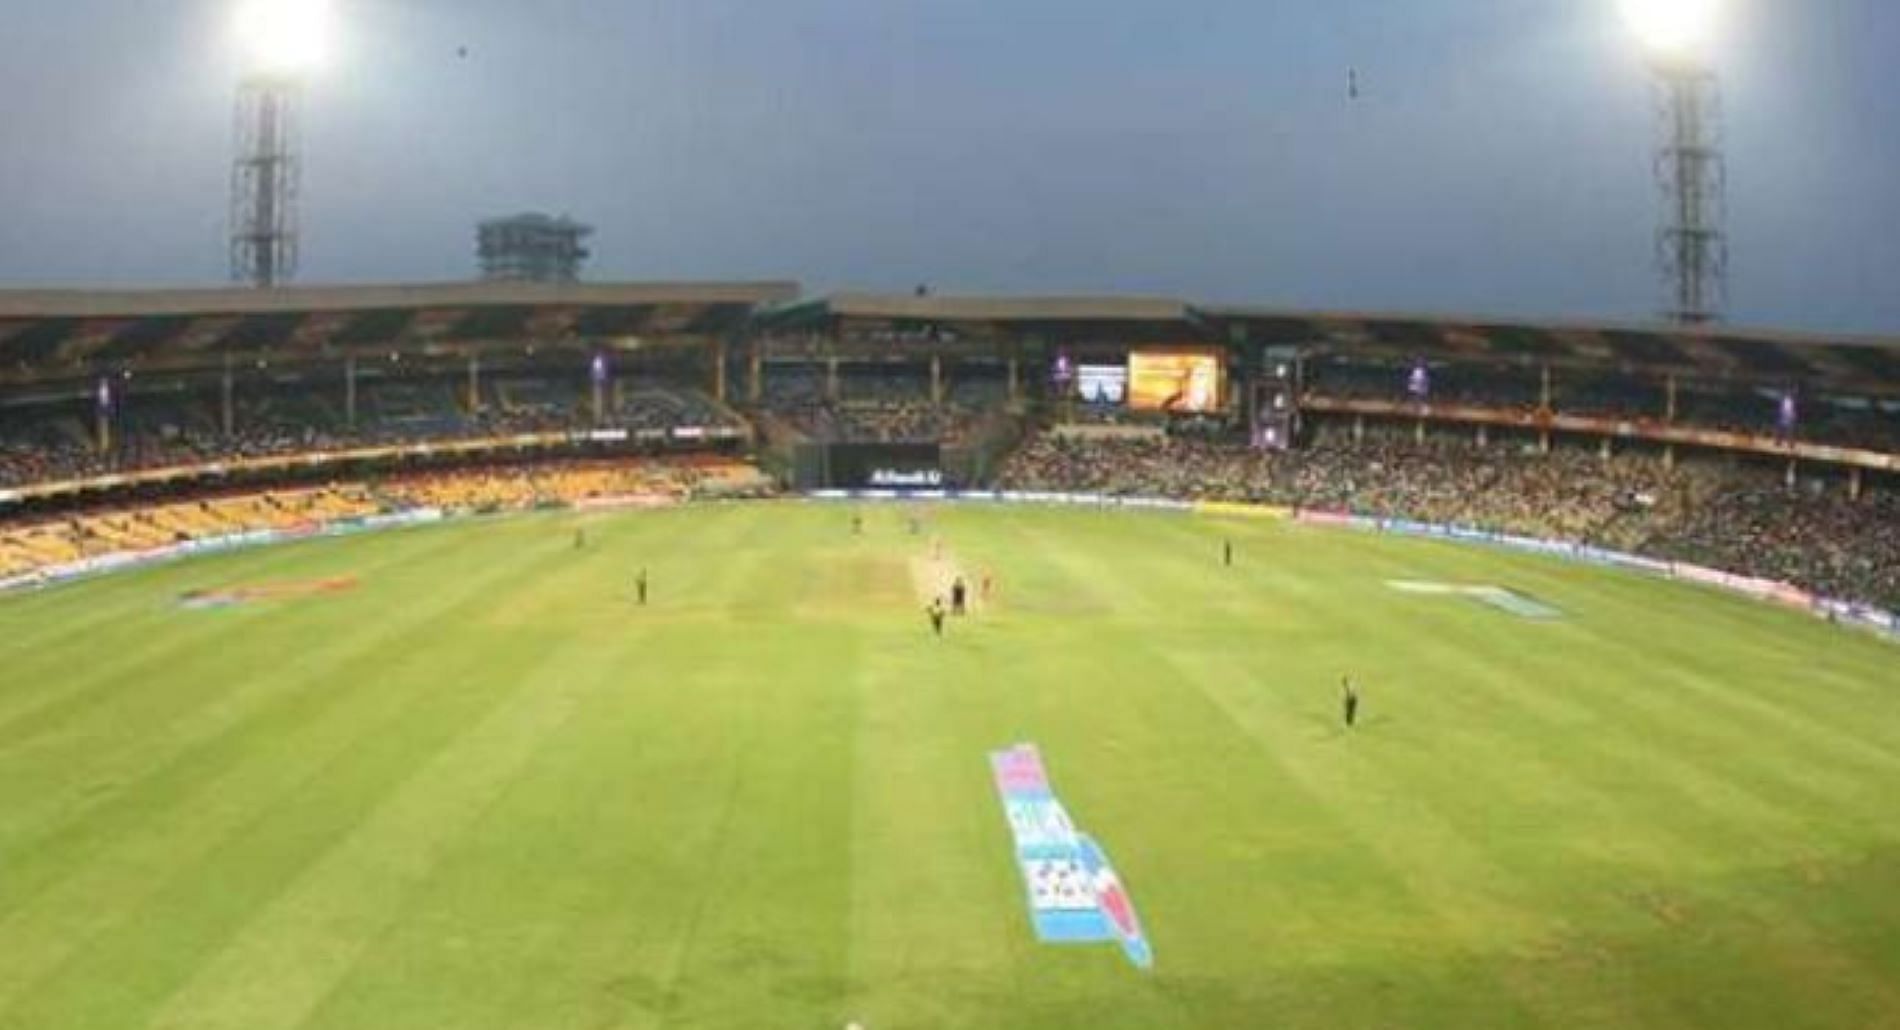 The Chinnaswamy Stadium is renowned for being a batting paradise.